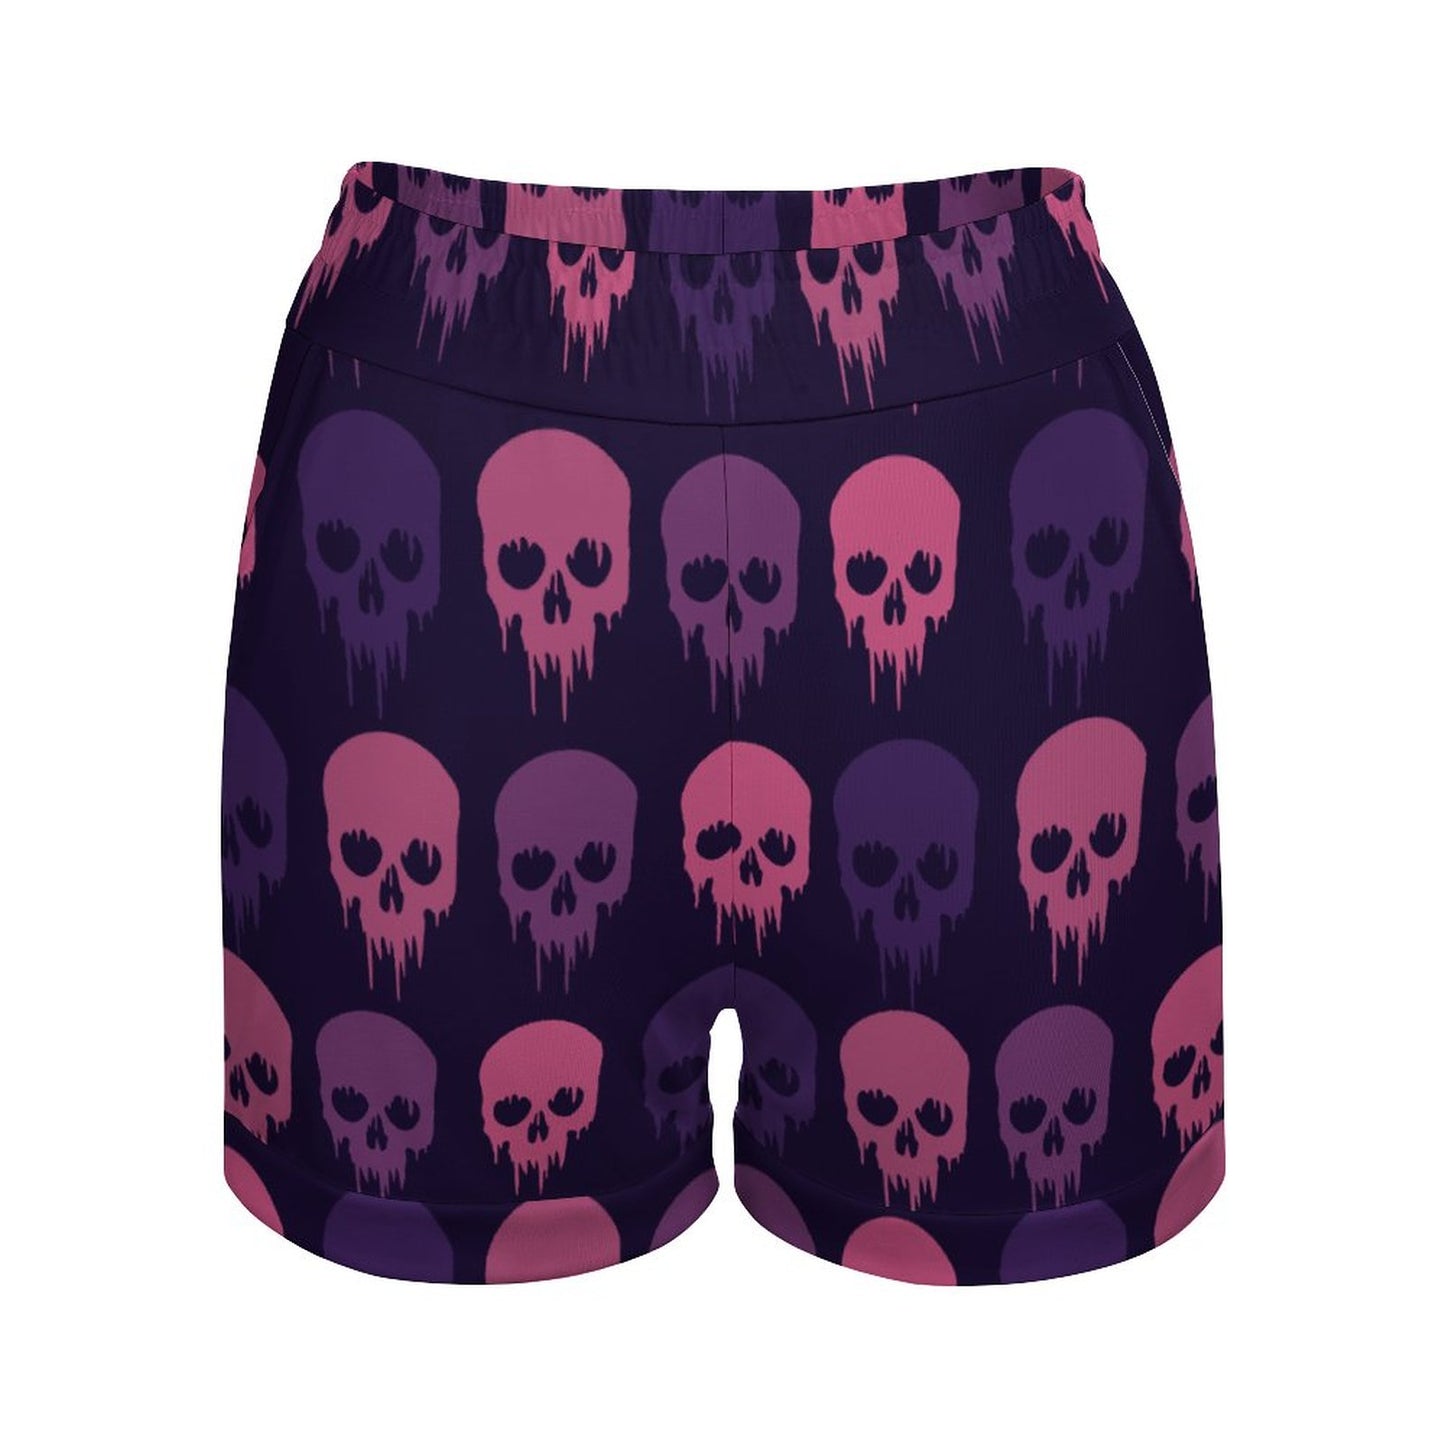 Online Customize Shorts for Women Women's Shorts Colored Skull